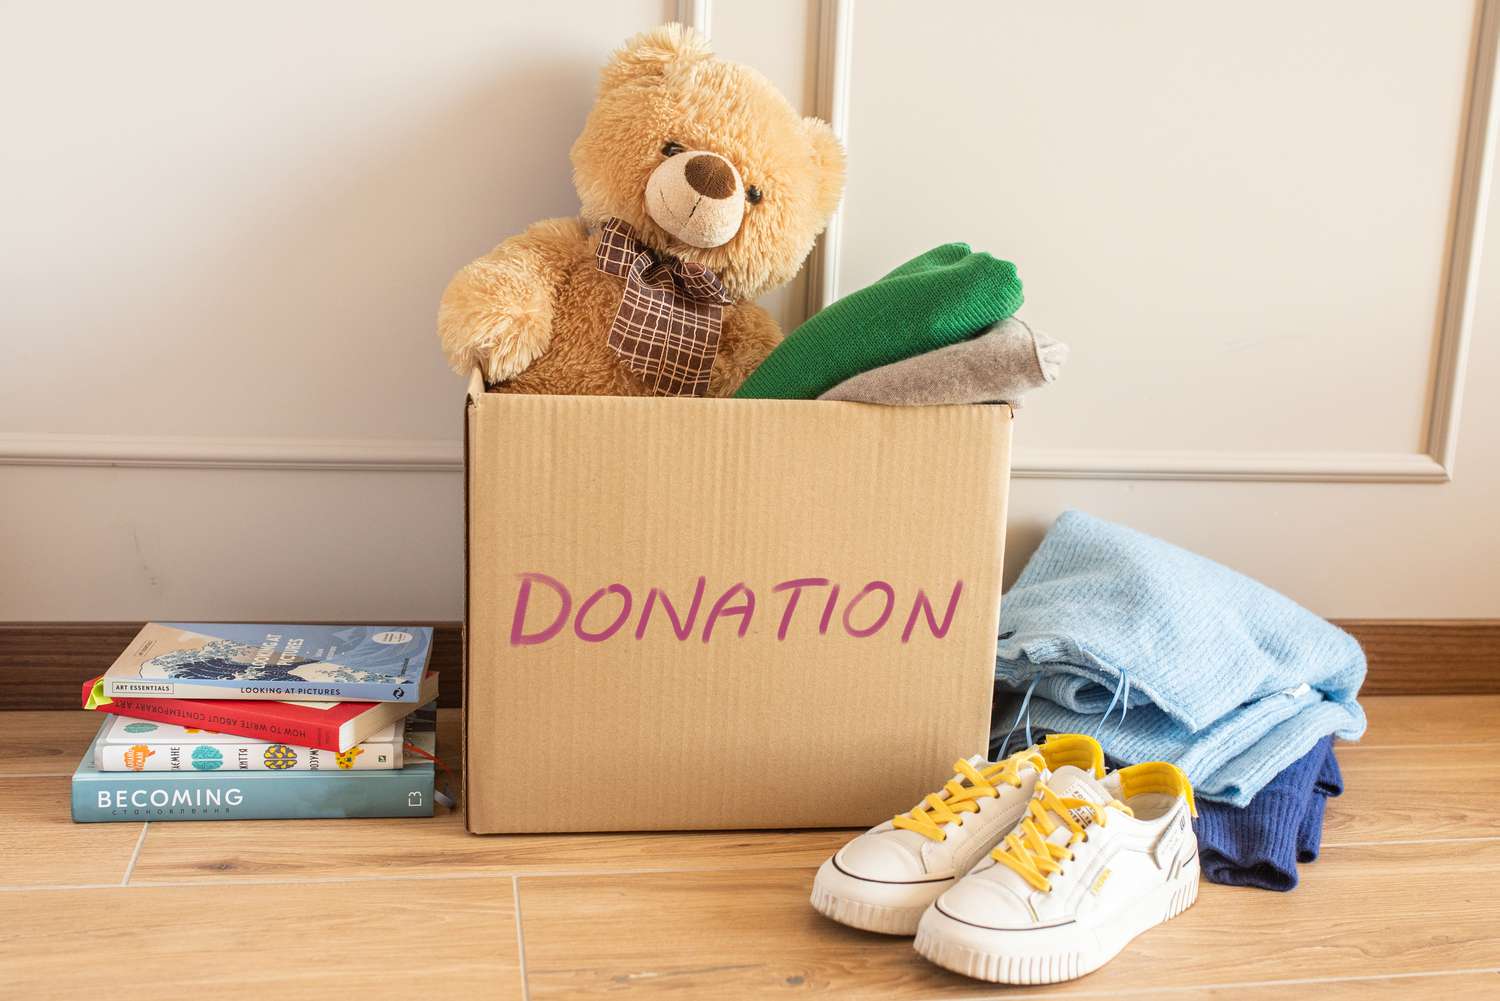 where-to-donate-everything-in-home-2648117_02-f88c1f8b70324c709dfbd8df9db217c0